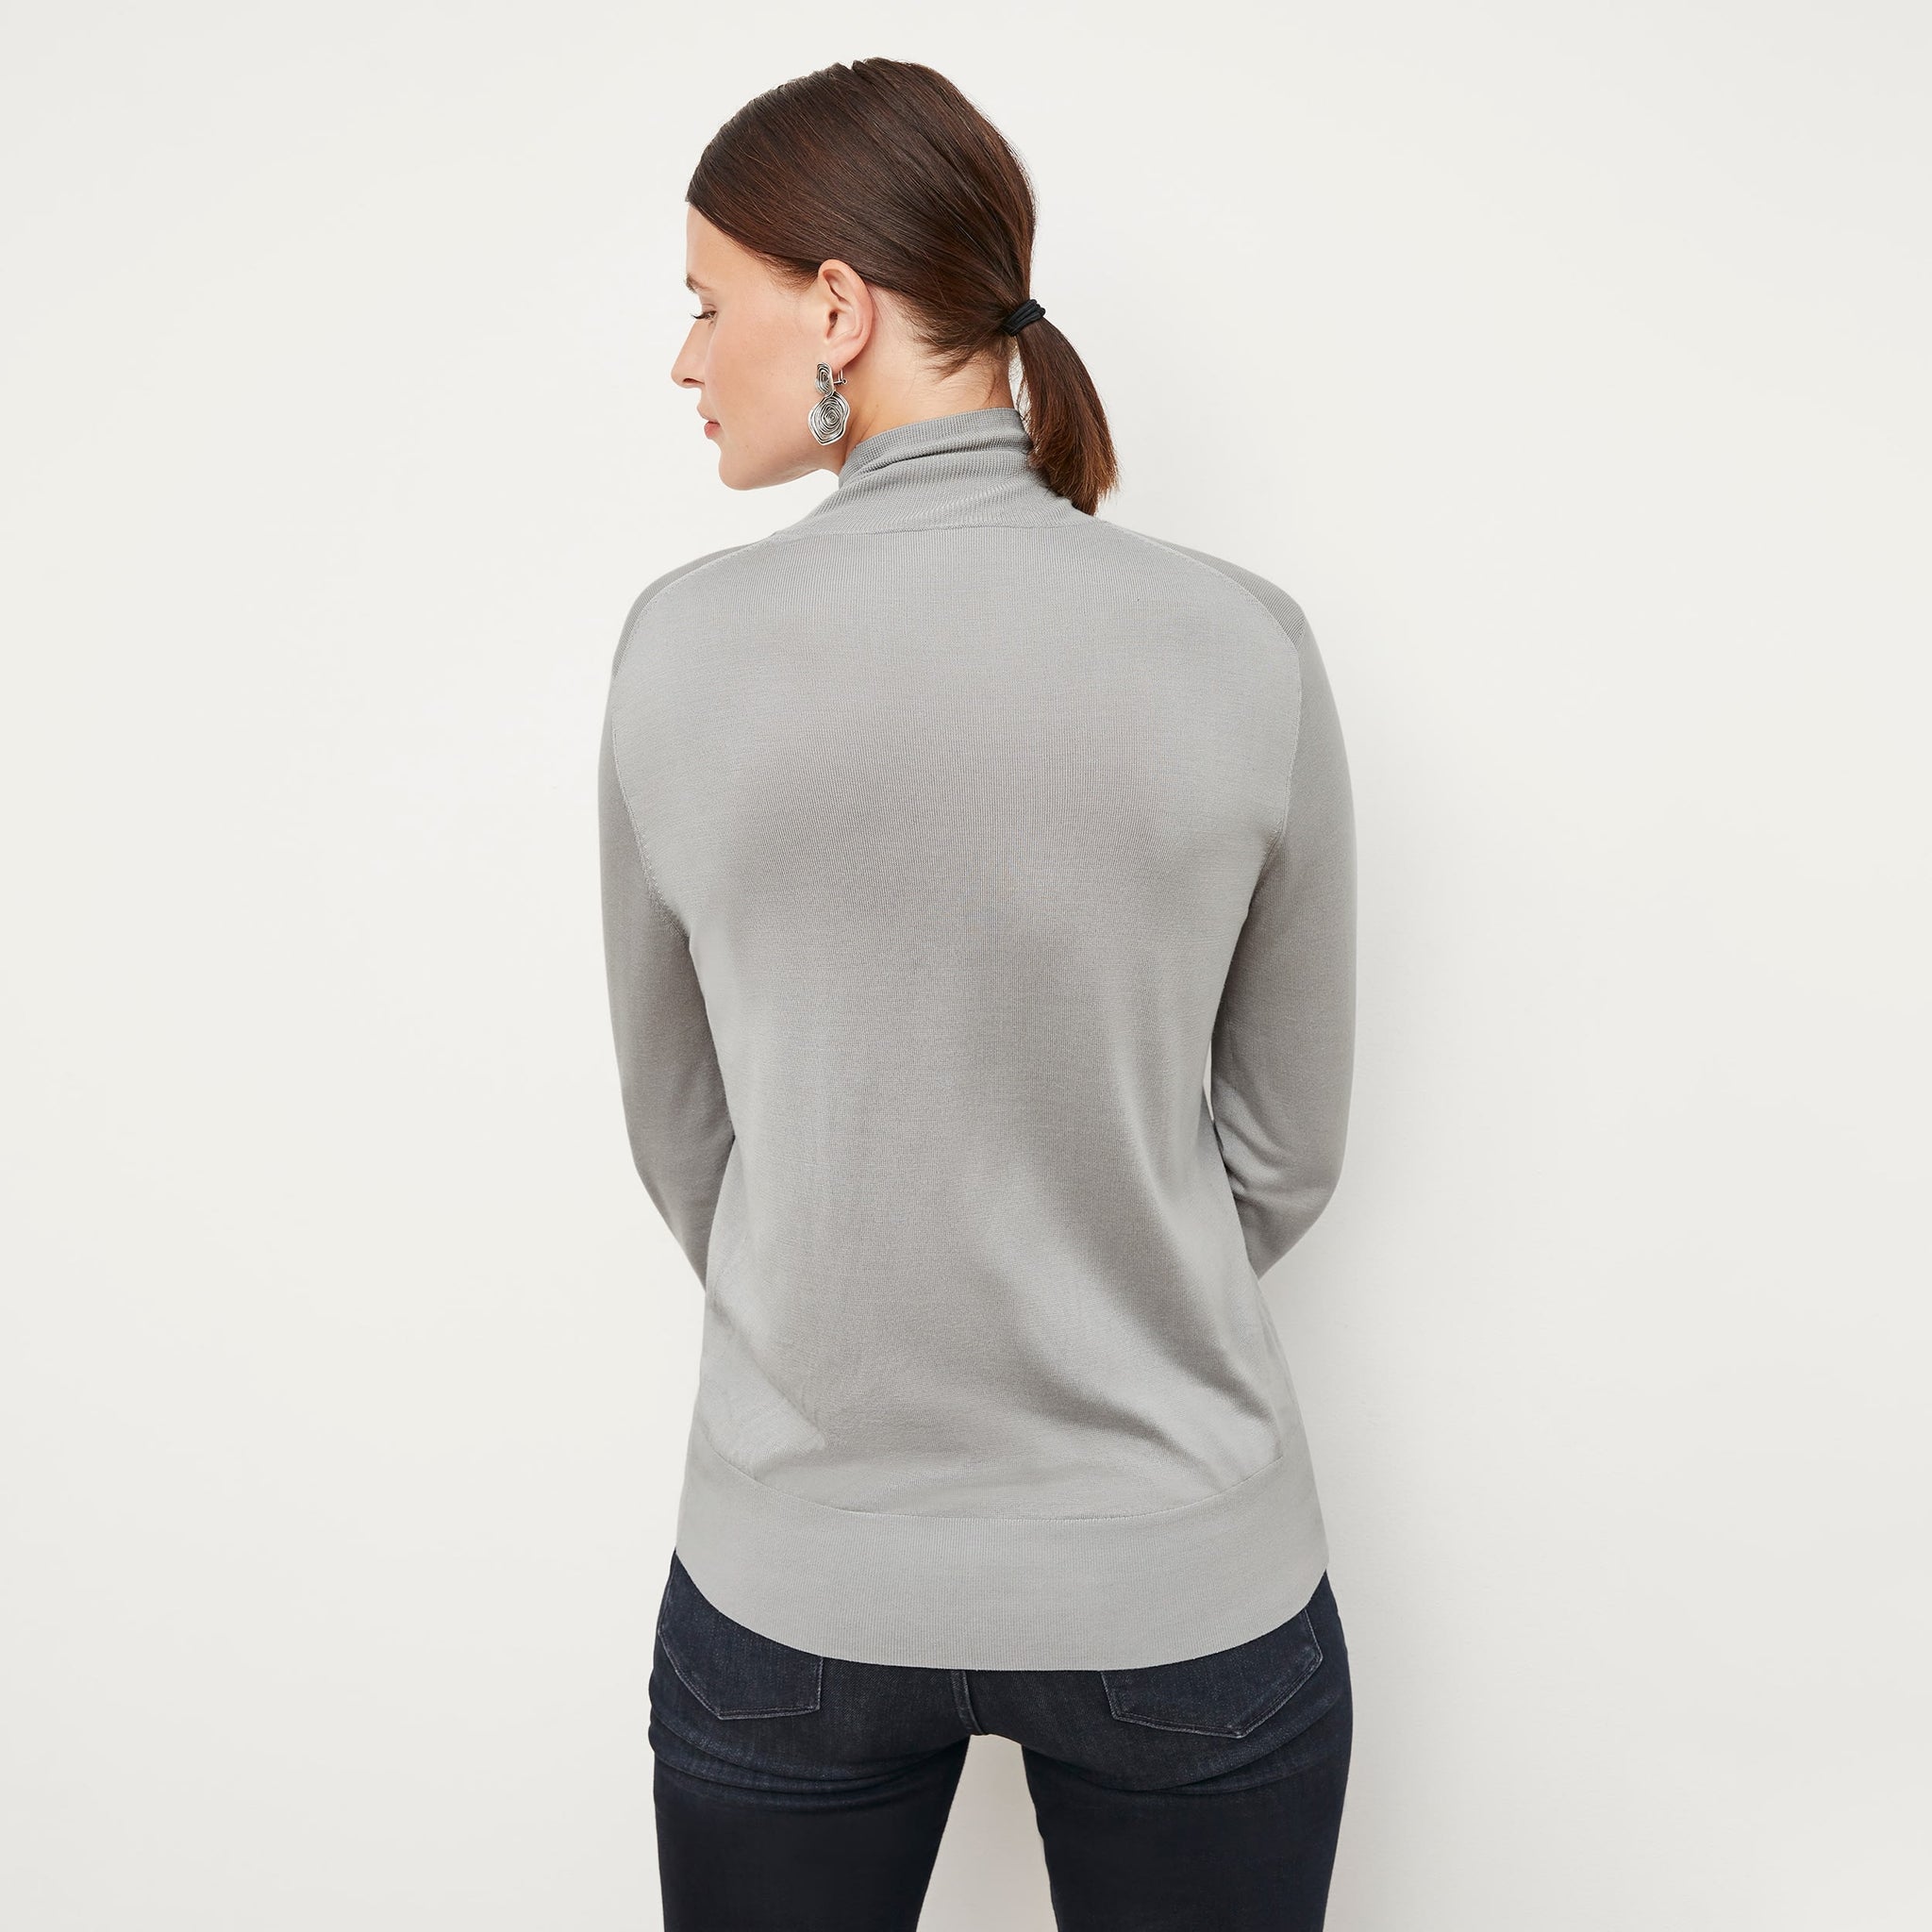 Back image of a woman standing wearing the elizabeth top in silk jersey in pale gray